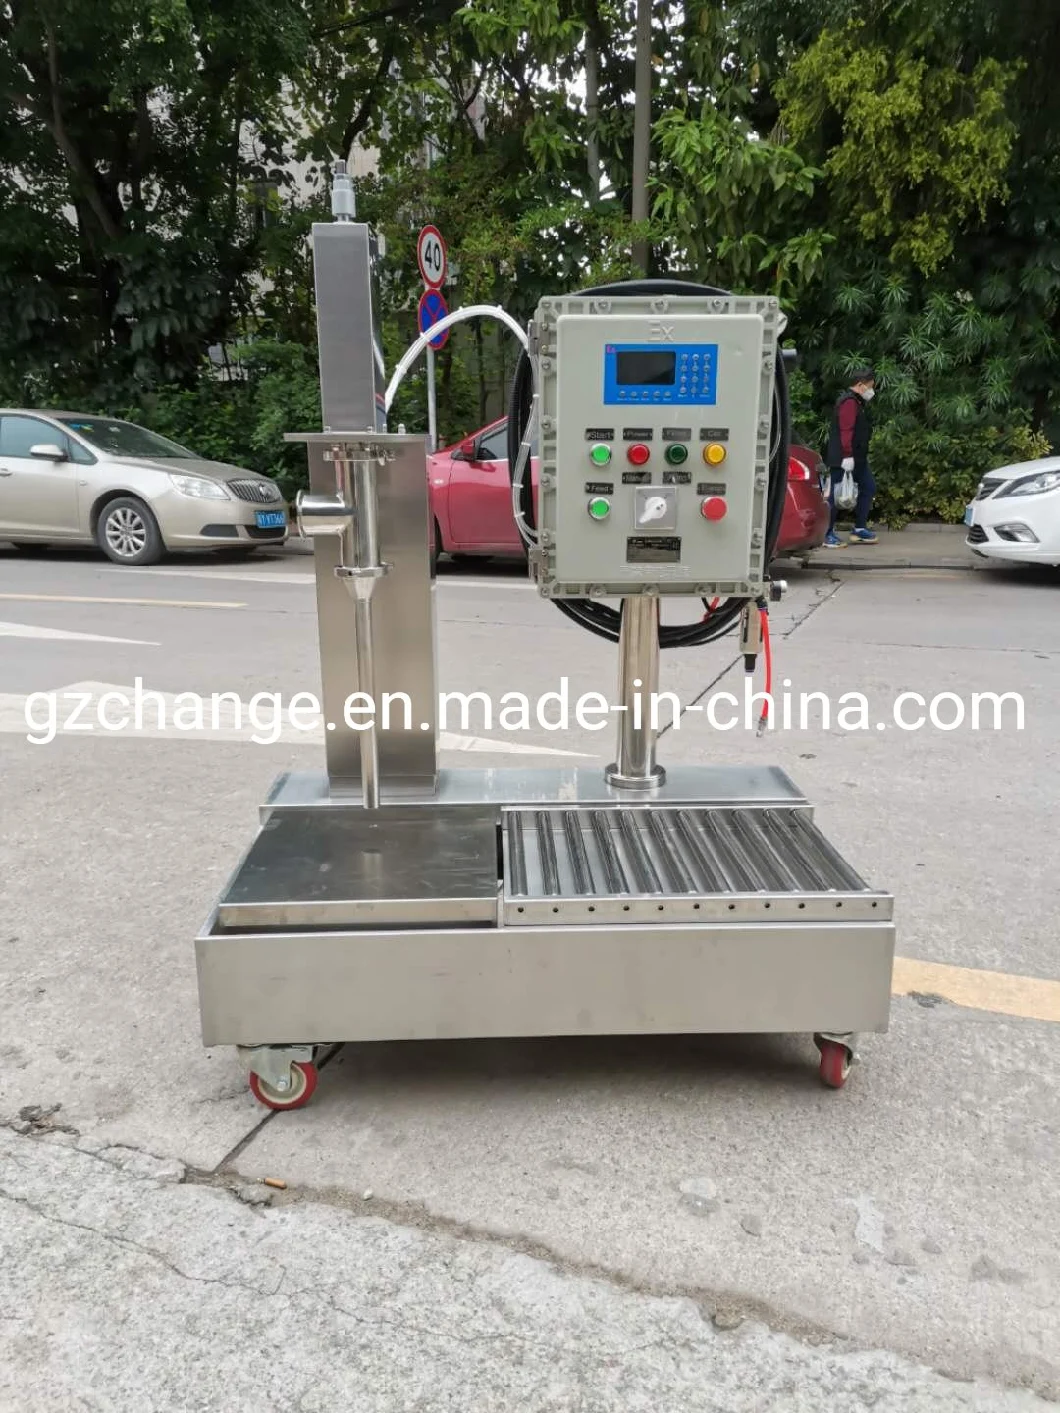 25-50L Alcohol Explosion Proof Weighting and Filling Machine